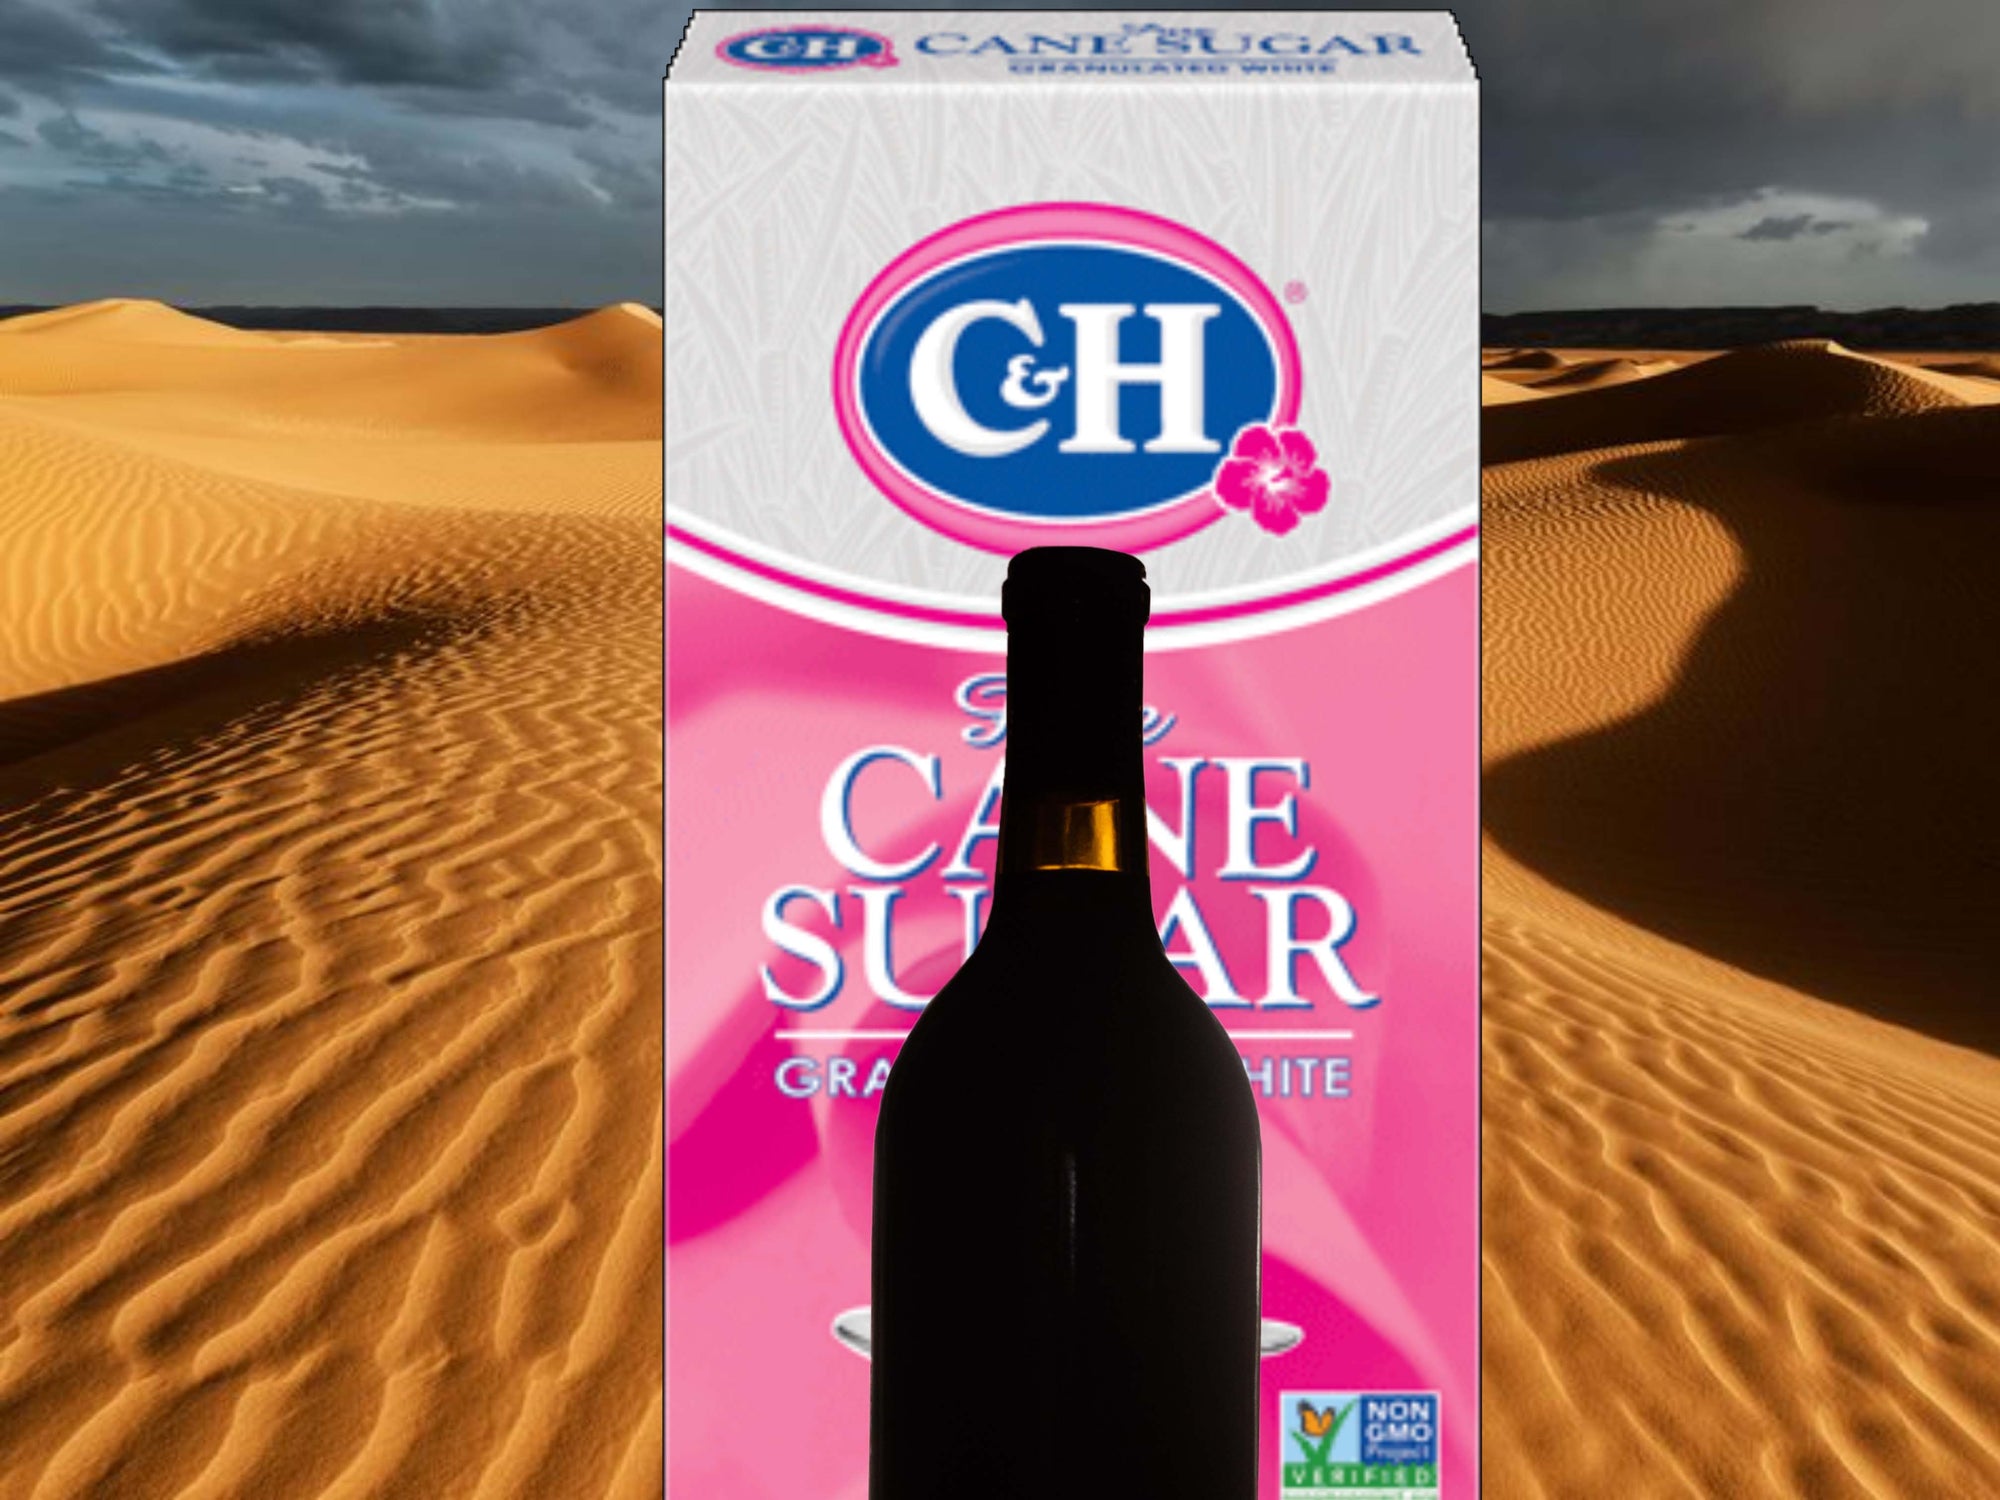 bottle of wine and box of cane sugar